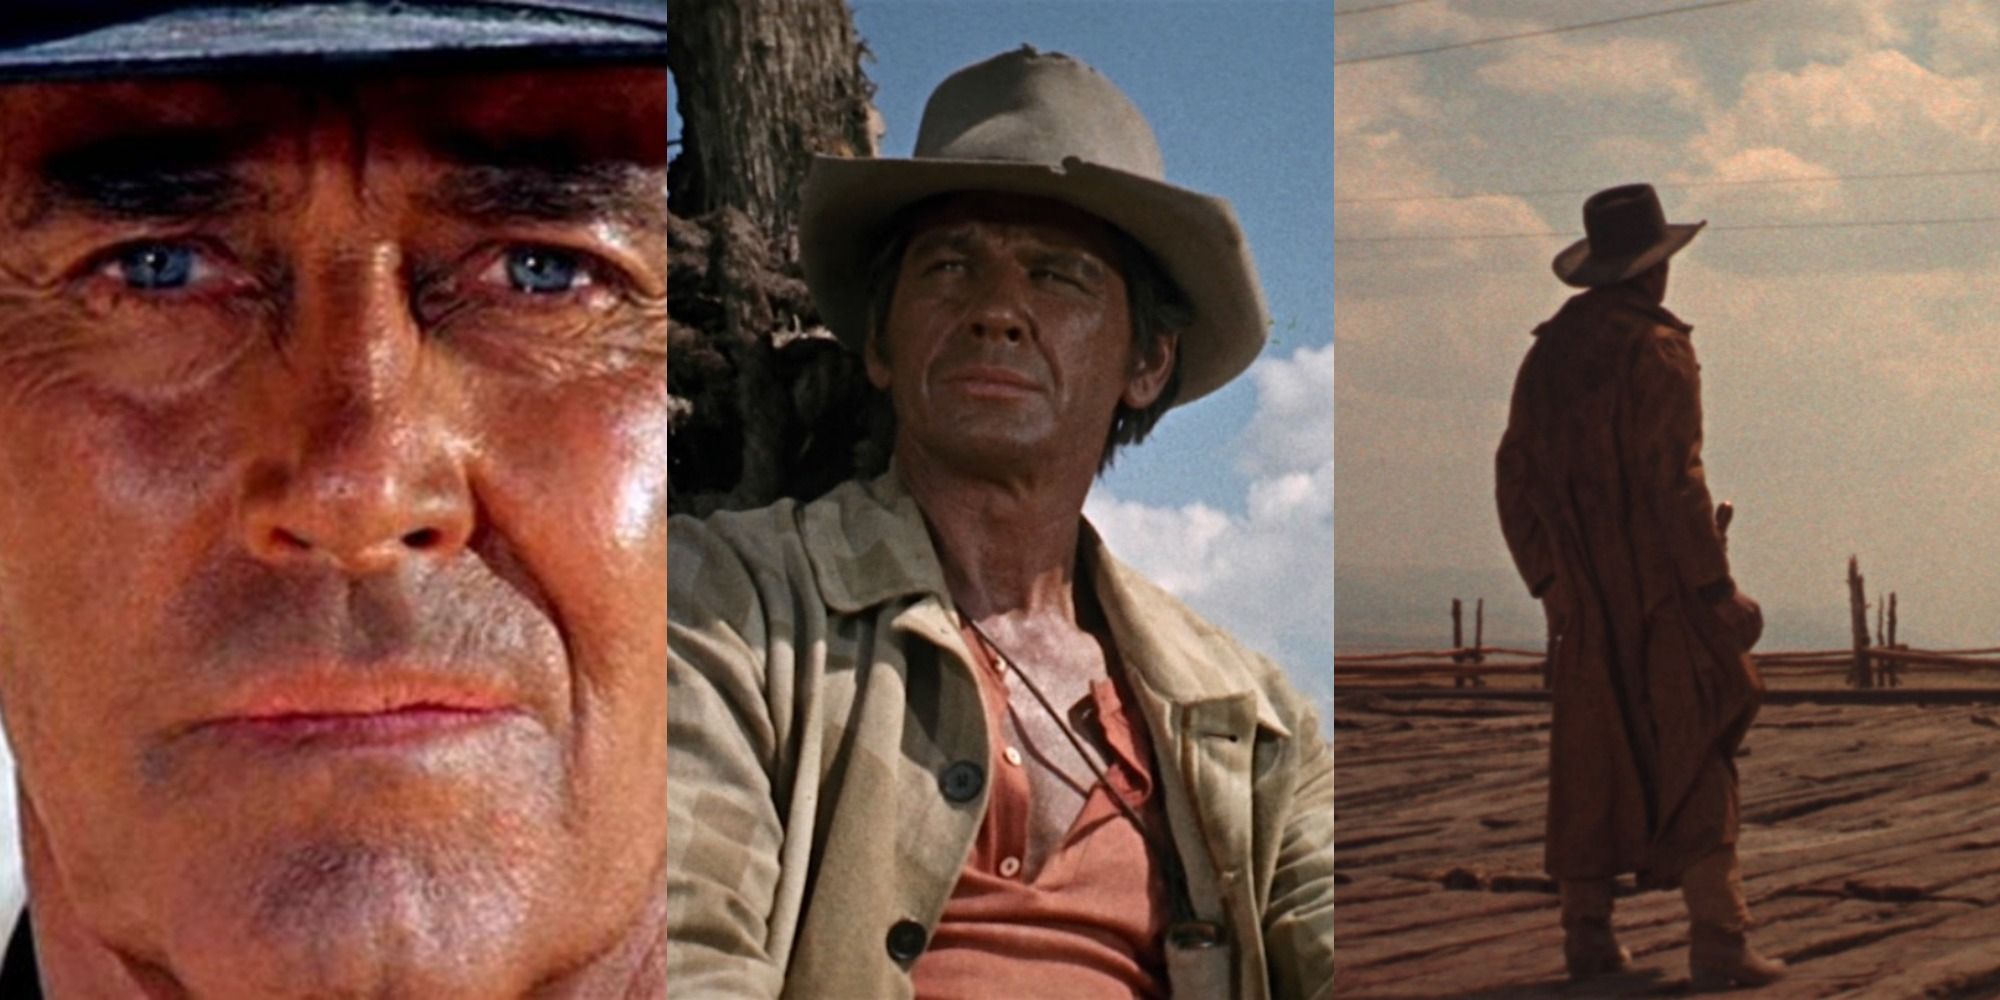 Collage of images from Once Upon a Time in The West